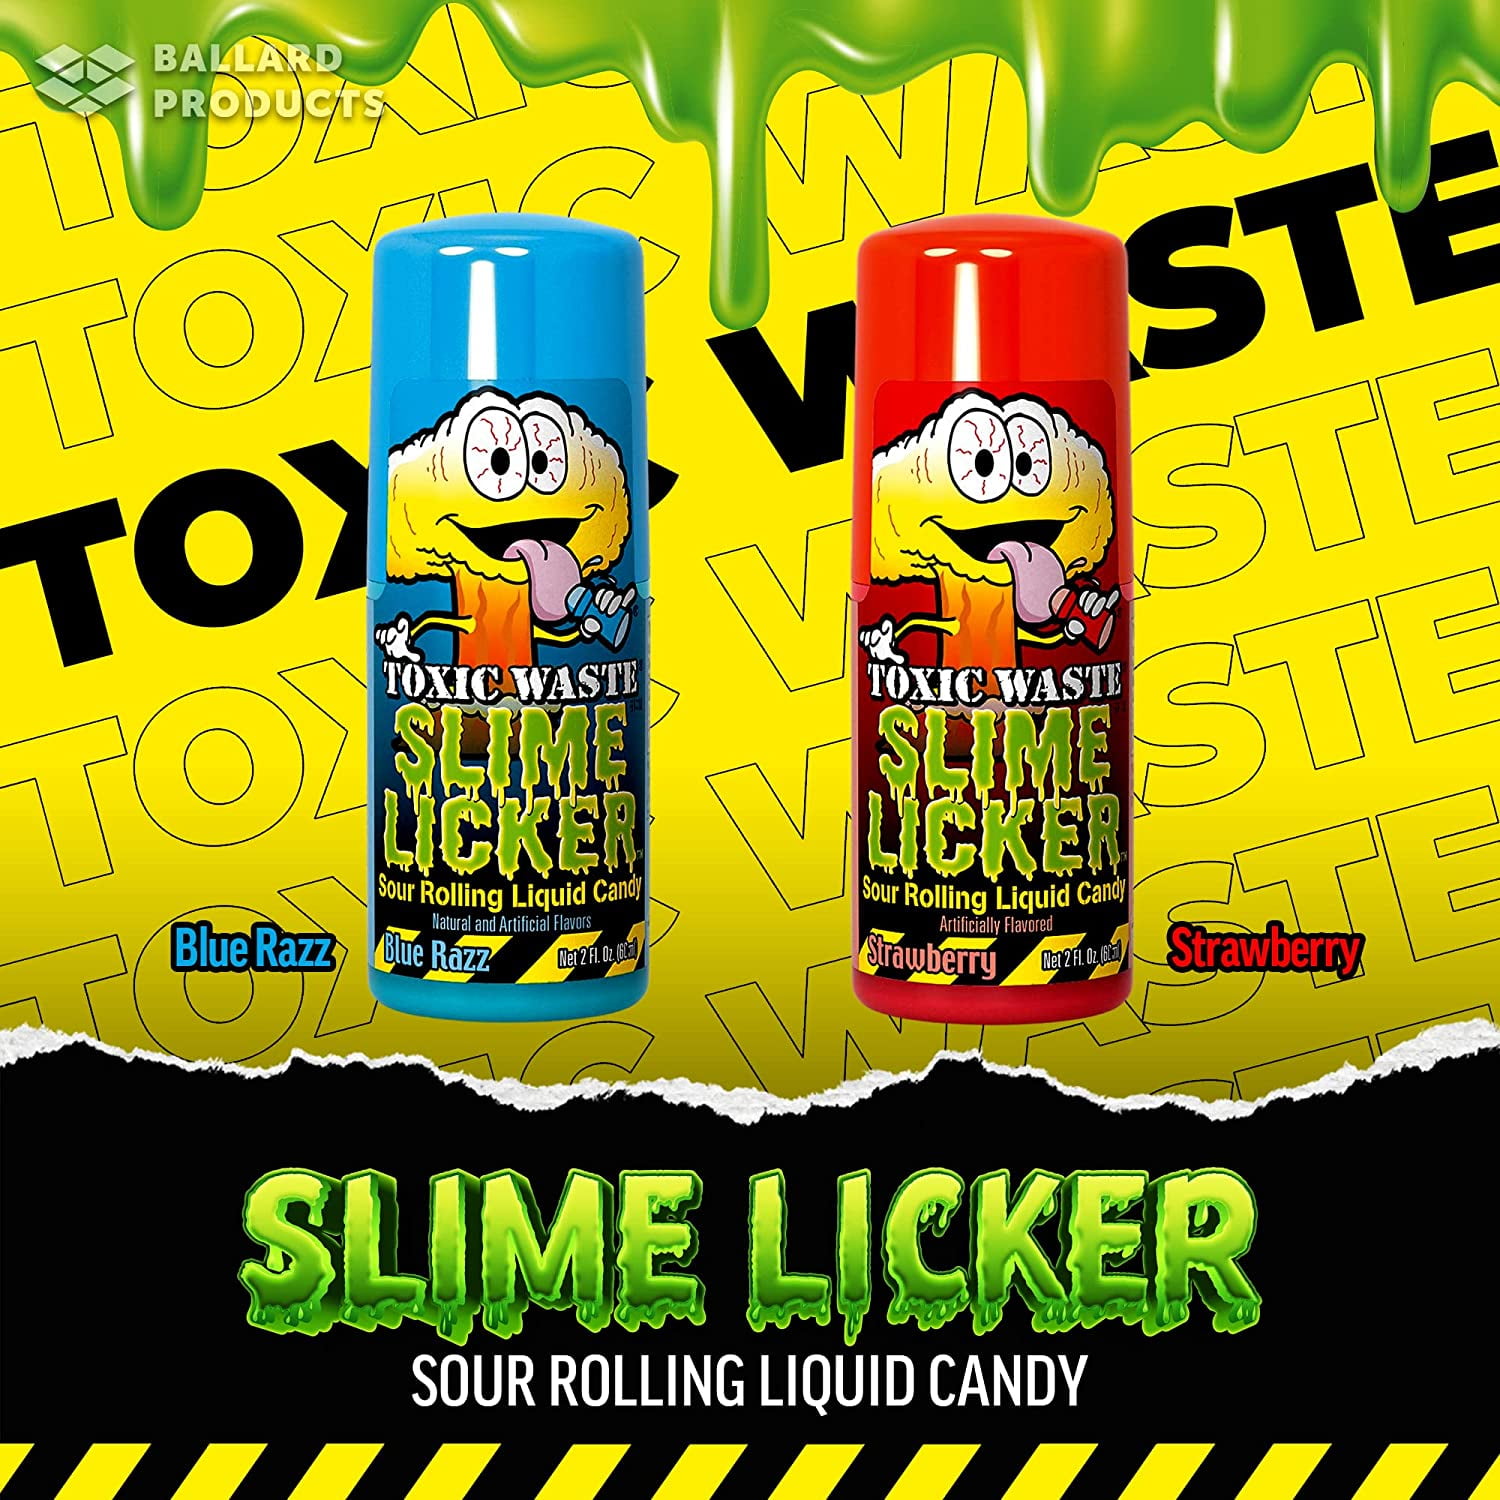 TOXIC WASTE SLIME LICKER - NEW FLAVORS 1PC - Party Out the Box